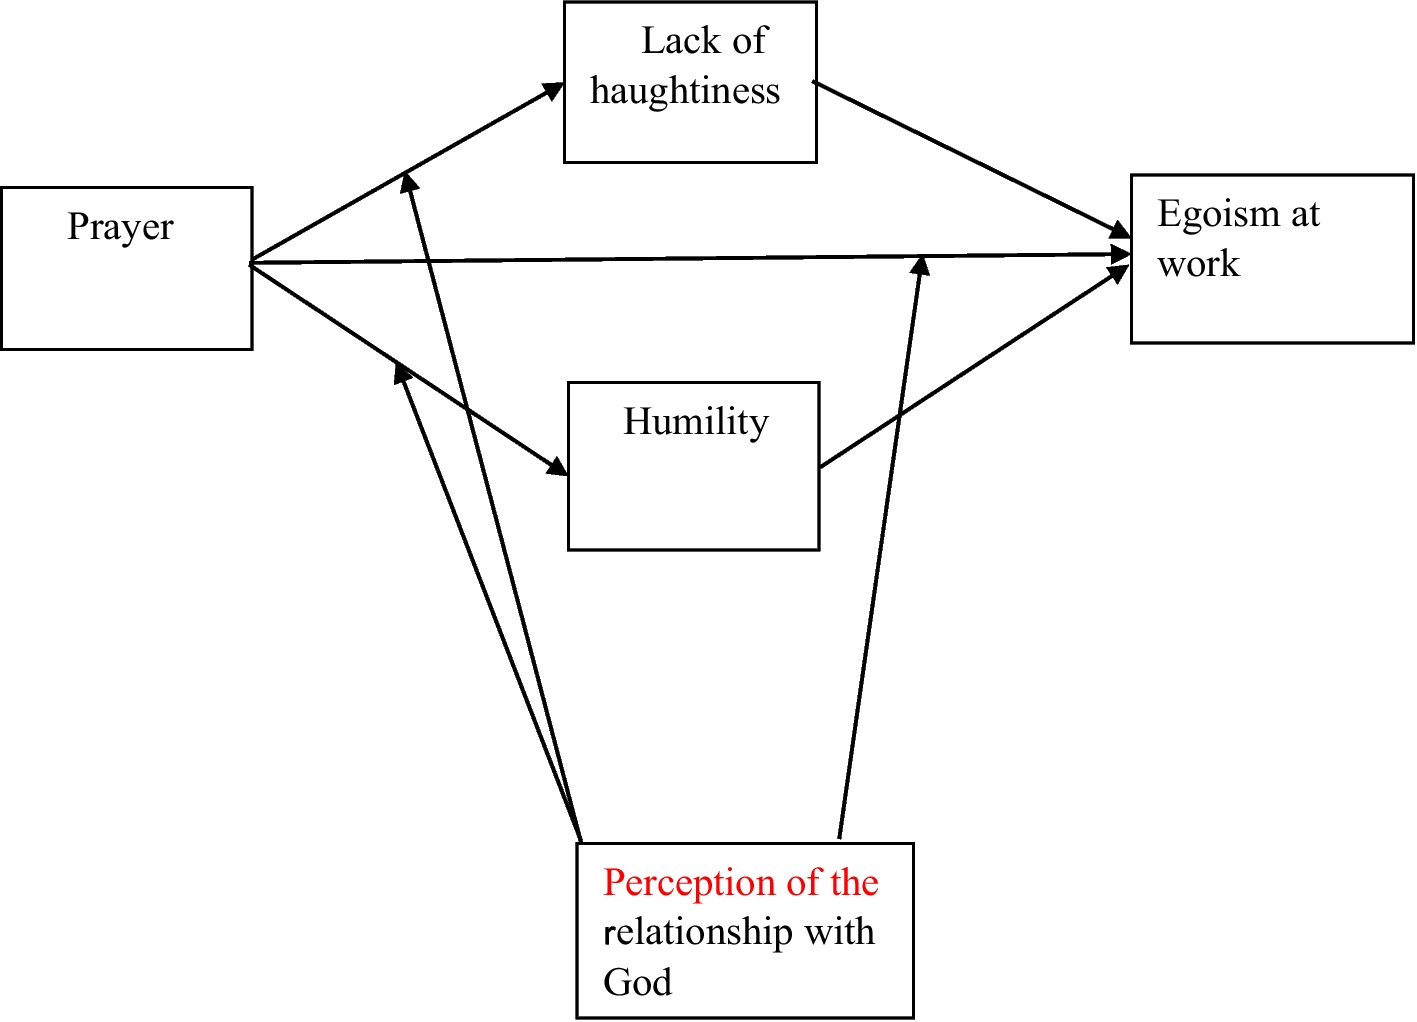 Whether Prayer Among Polish Employees Is Related to Egoism at Work: The Moderating Role of Employees’ Perception of Their Relationship With God and the Mediating Role of Humility